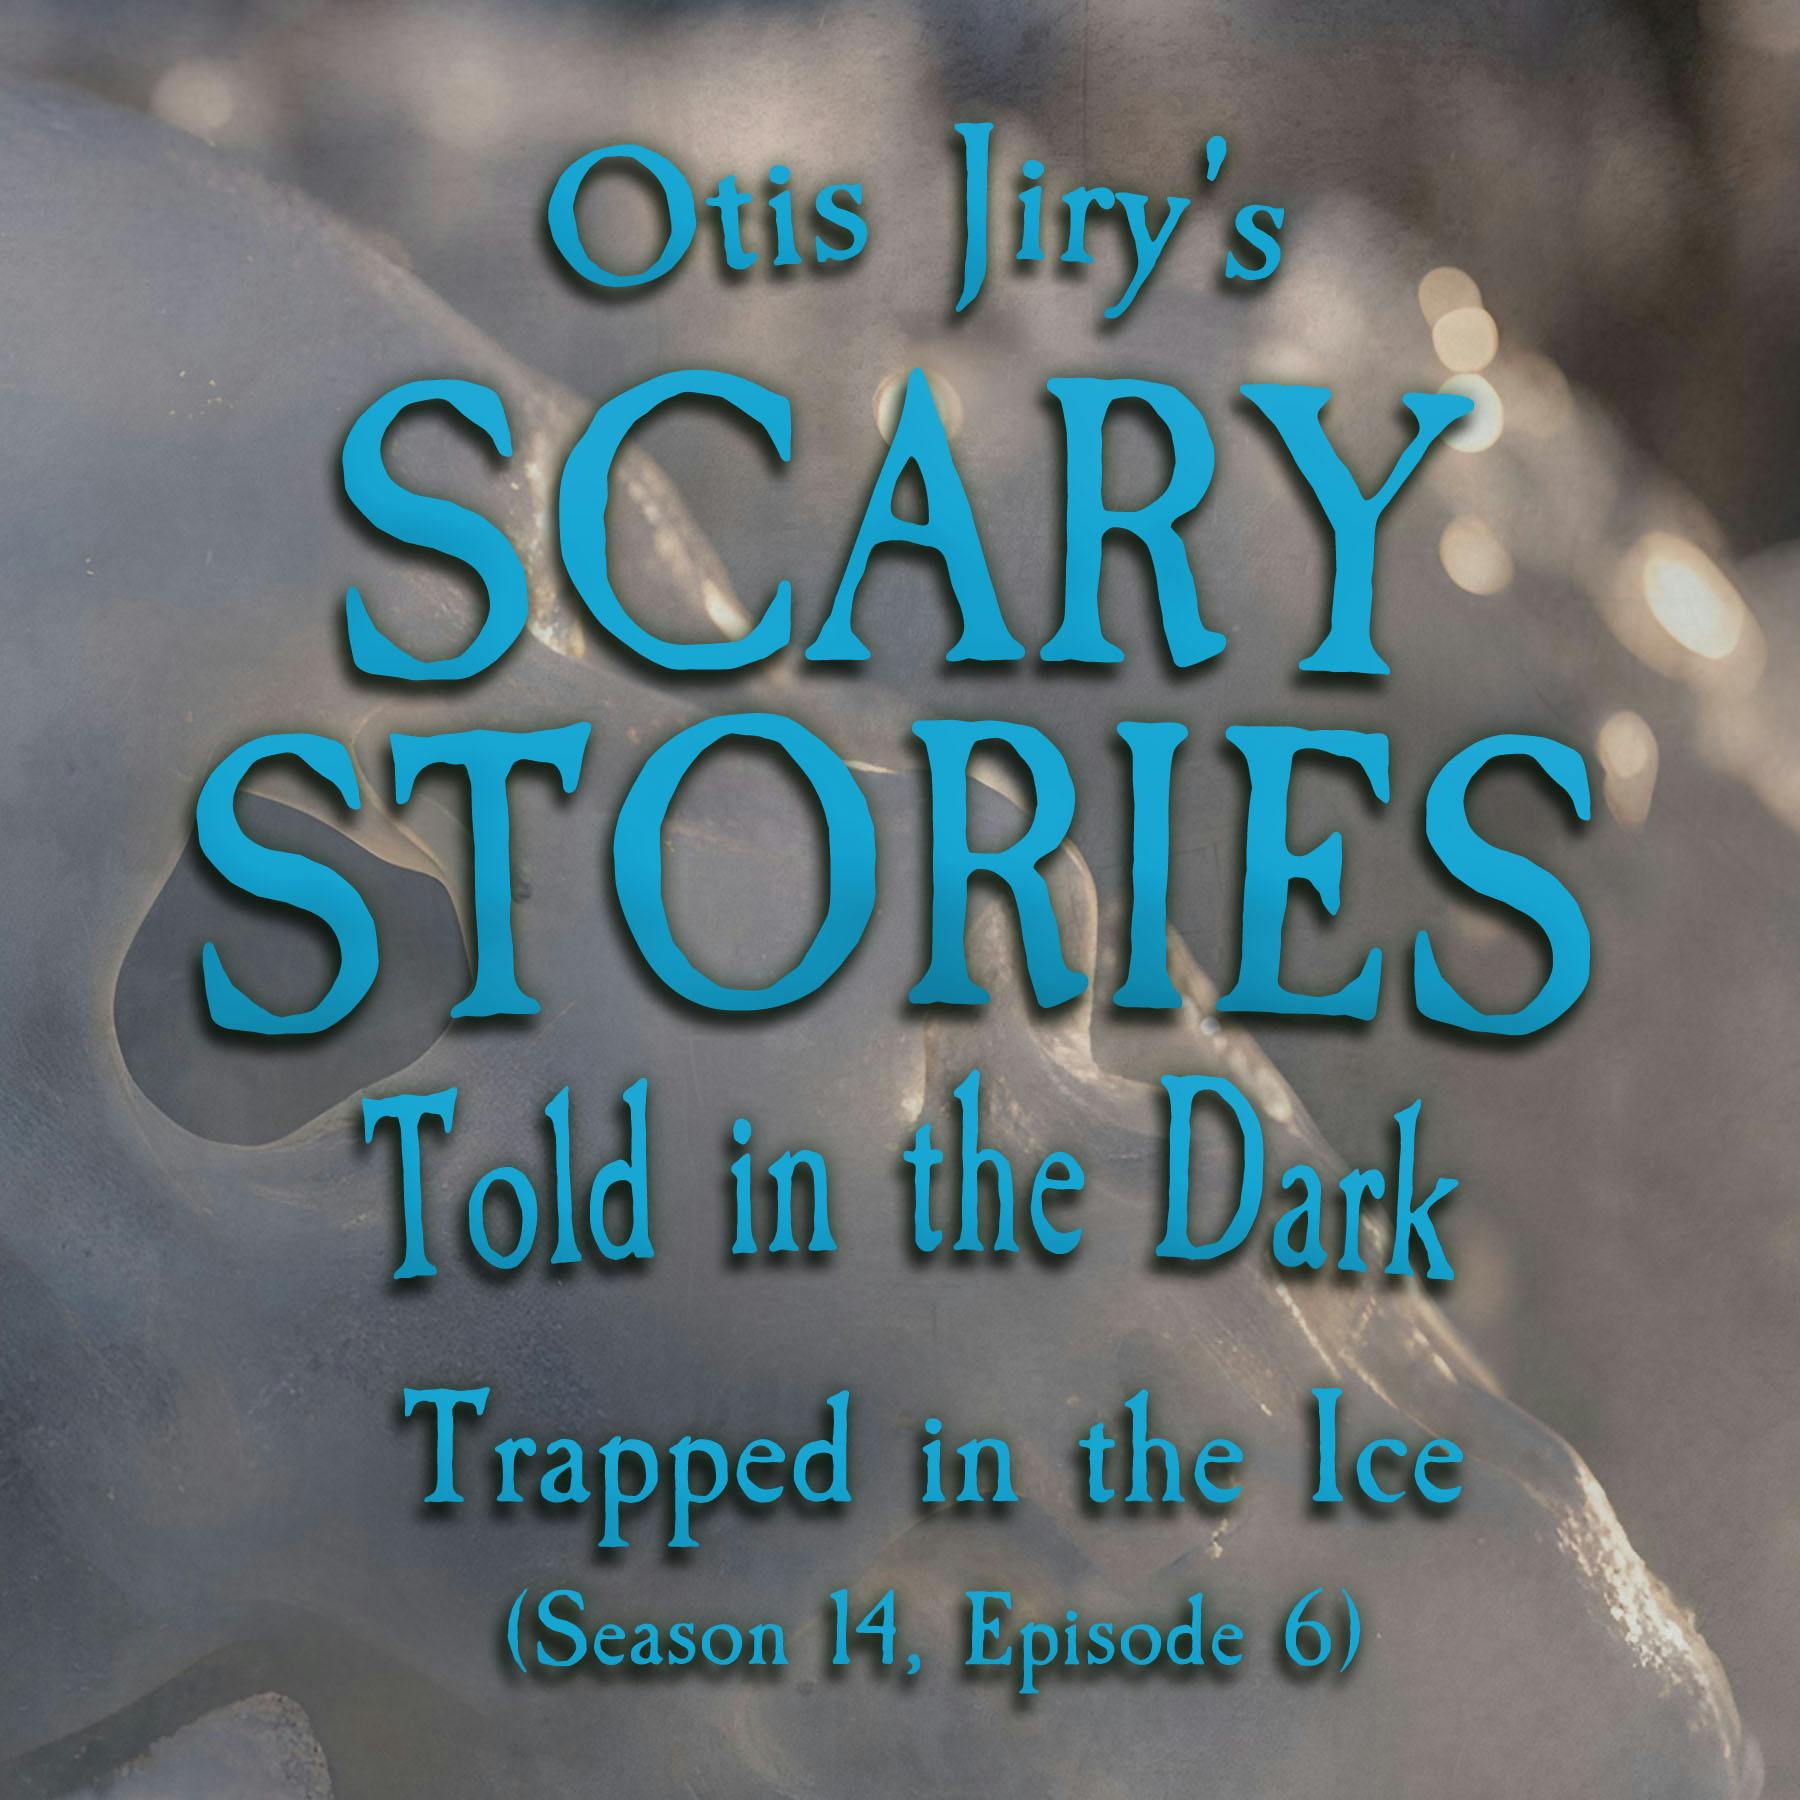 S14E06 - “Trapped in the Ice” – Scary Stories Told in the Dark